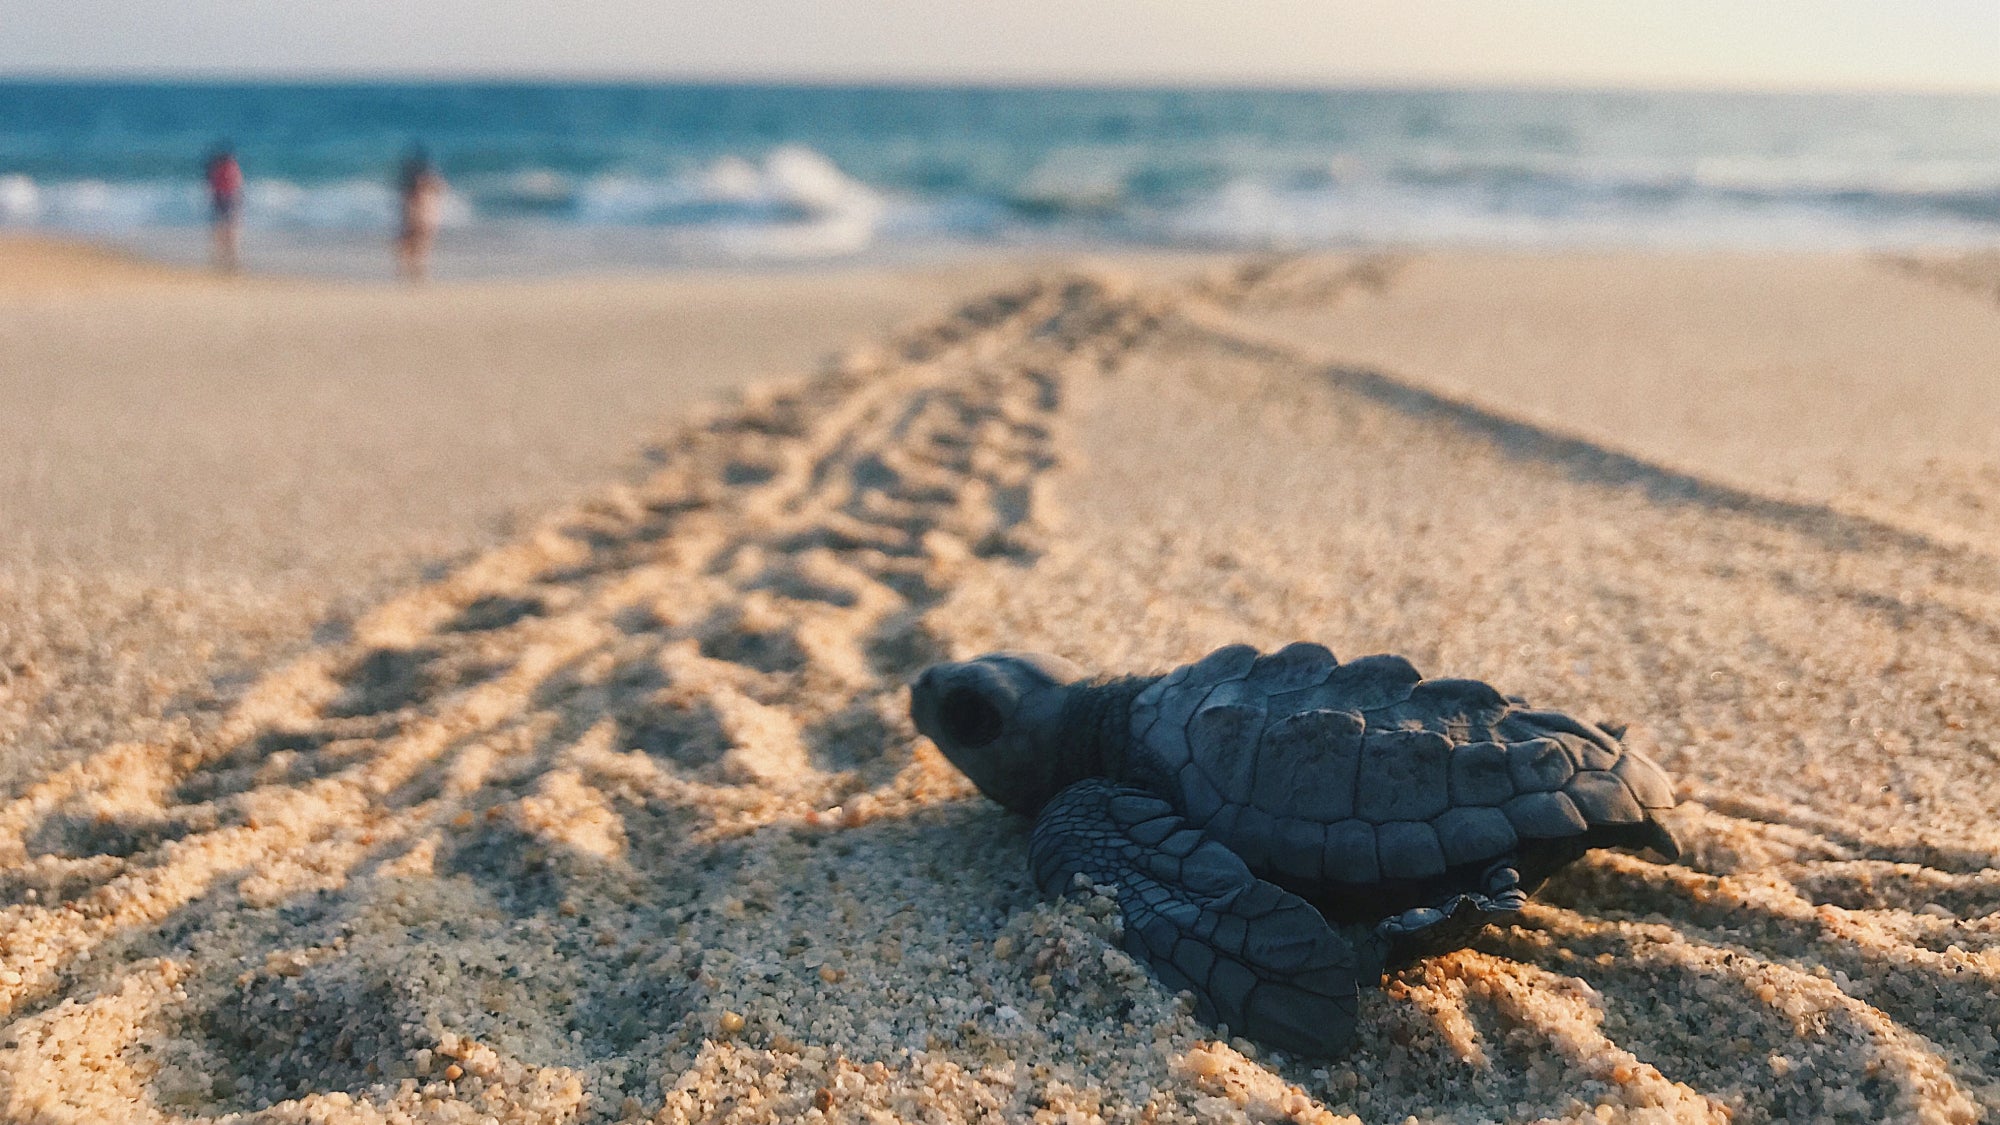 How to protect sea turtles and their nests | Popular Science